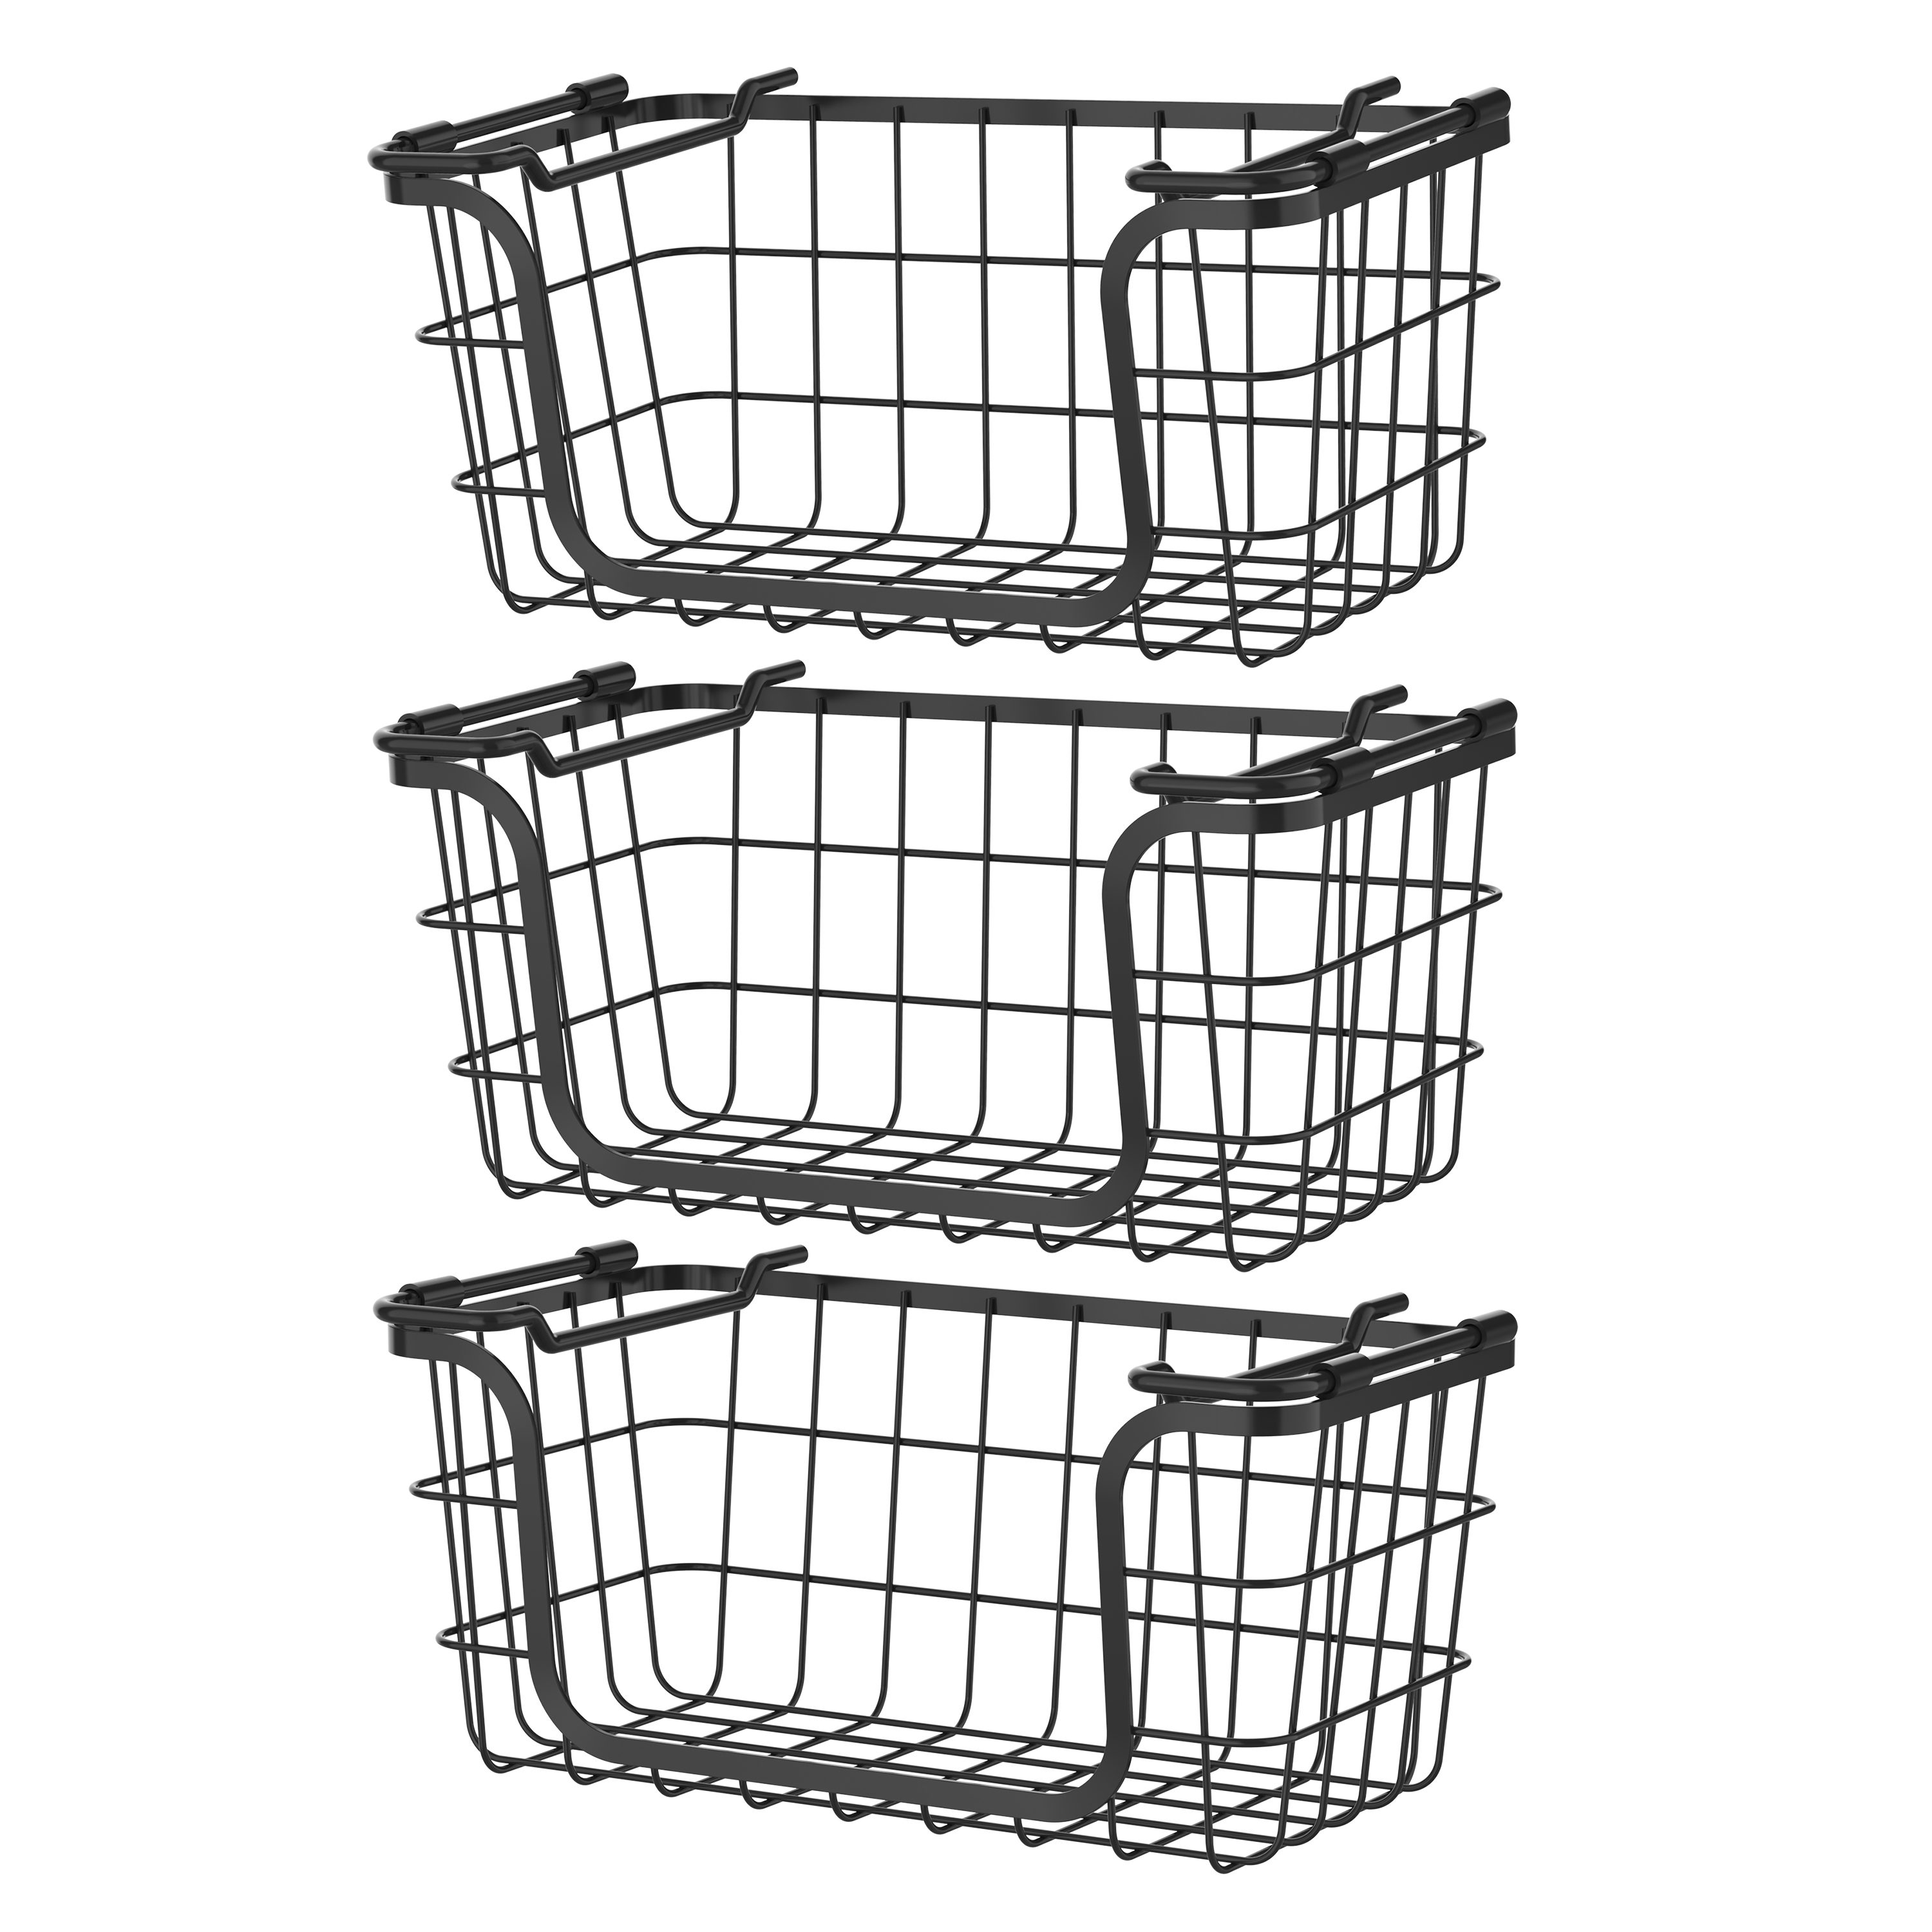 Farmhouse Baskets Wire Storage Baskets, Pantry Organizer Baskets with Wood  Handle, Metal Baskets Bins for Kitchen Pantry Shelf Cabinets, White,2 pack